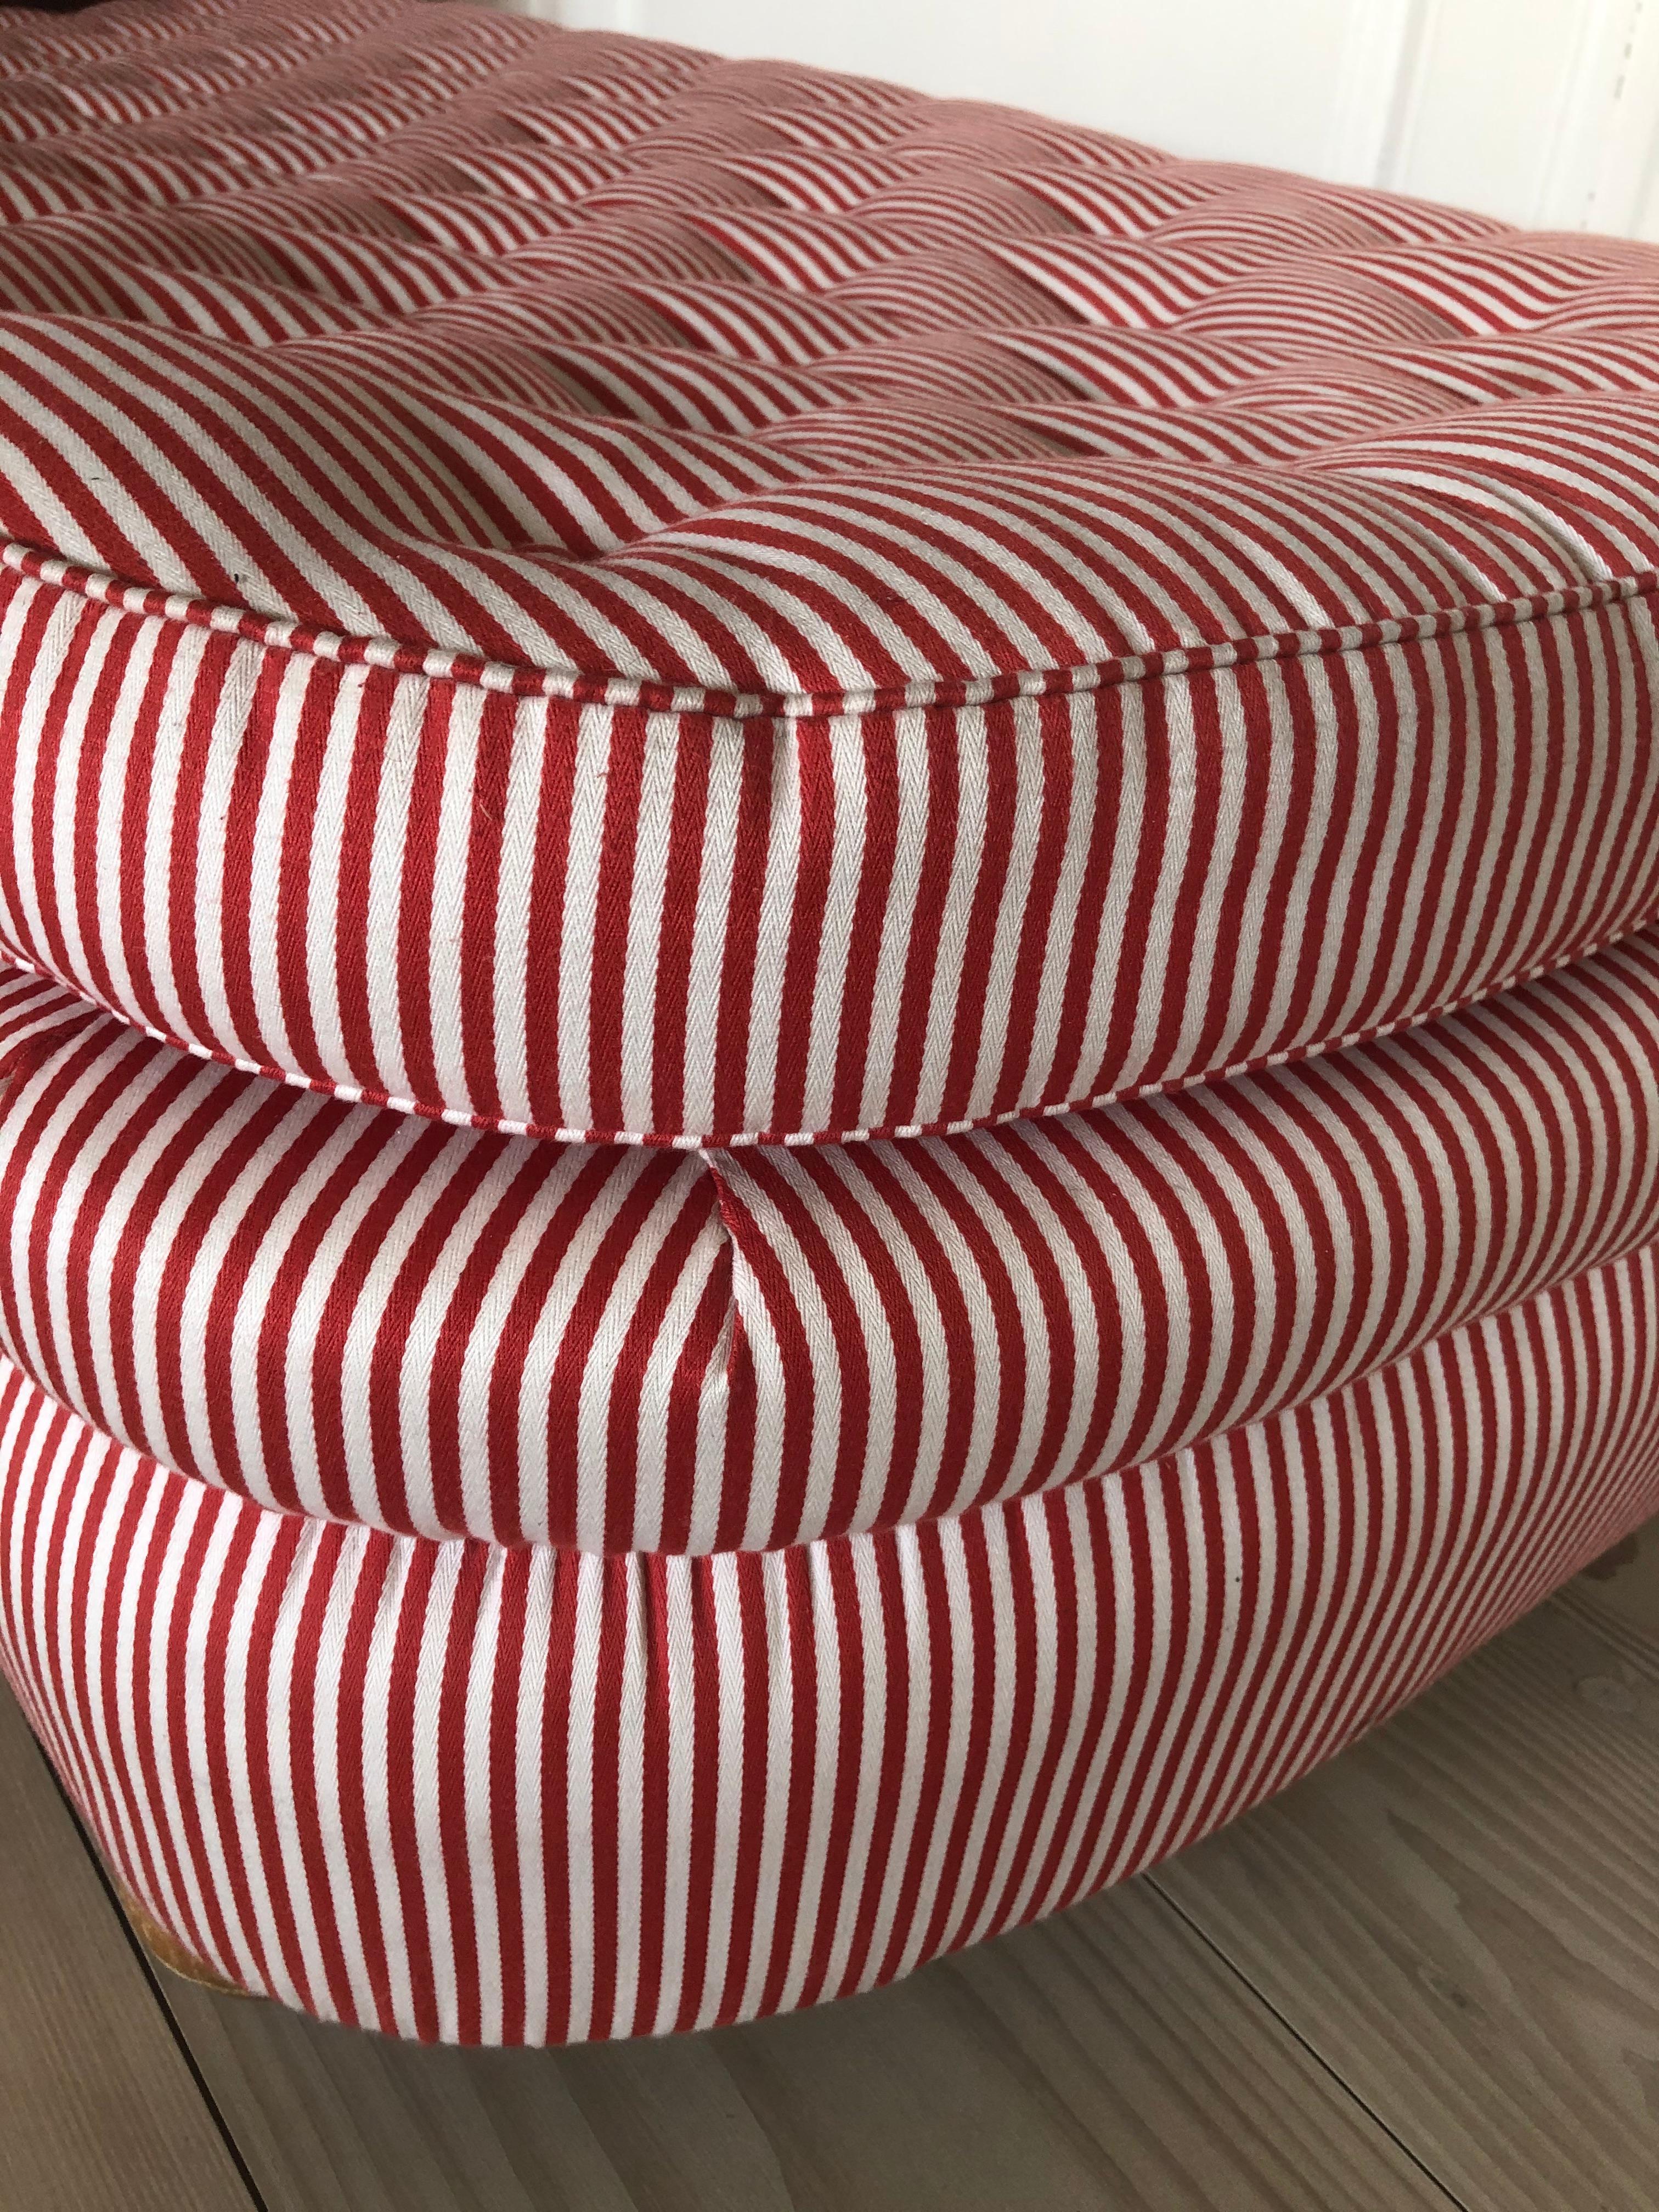 striped daybed